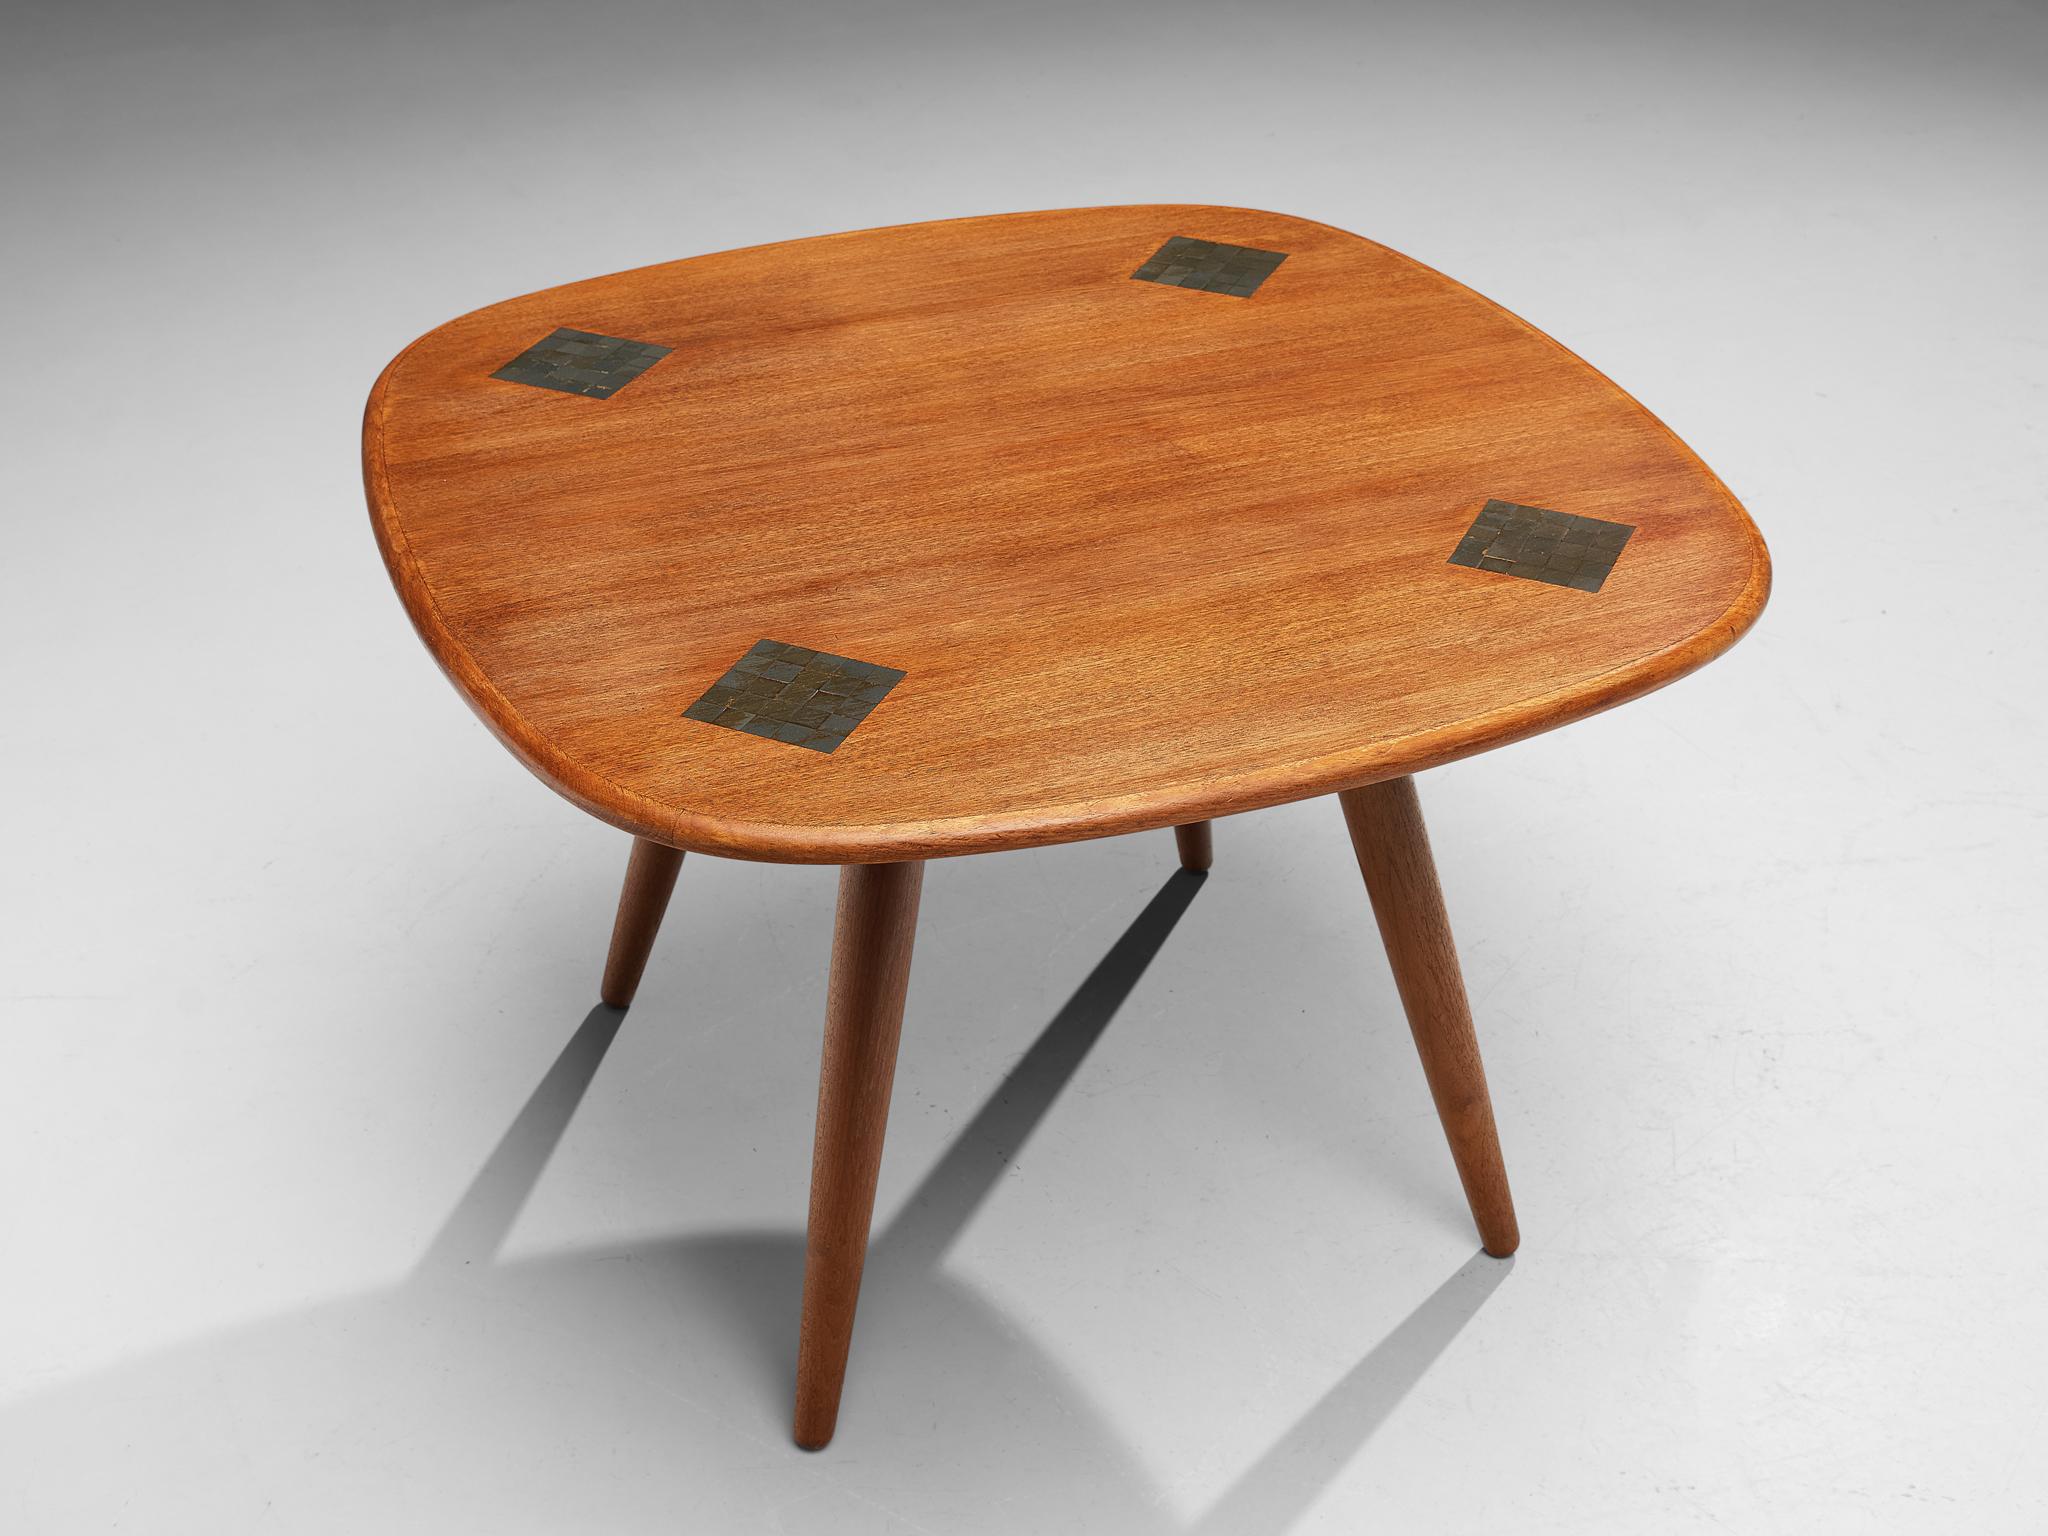 Ceramic Side Table in Teak with Mosaic Inlay